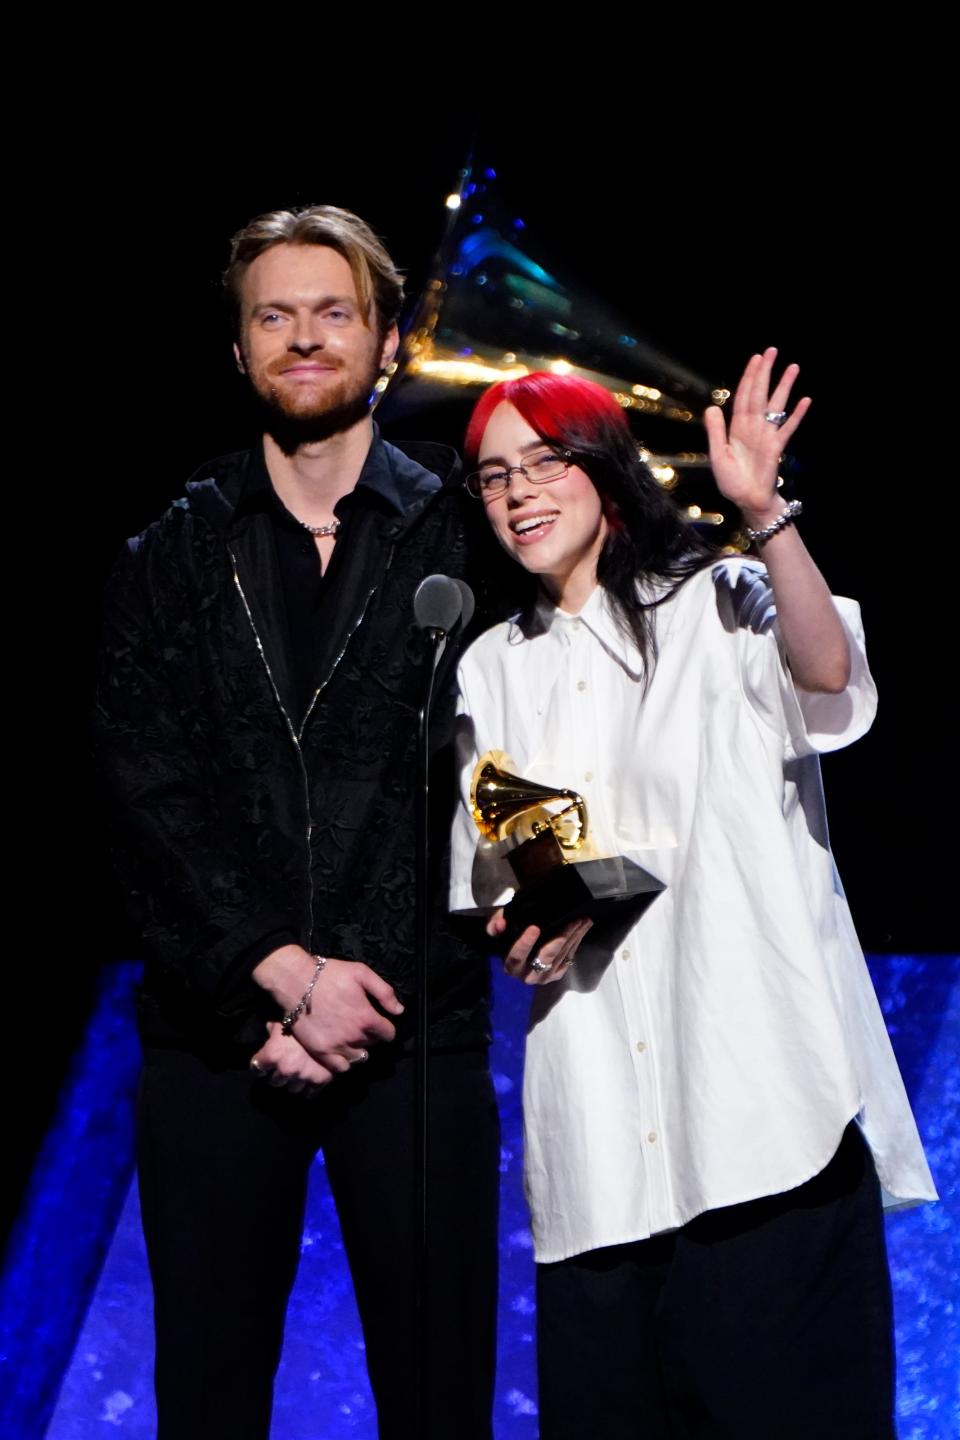 Billie Eilish, right, and brother Finneas O'Connell accept best song written for visual media for "What Was I Made For?" (from "Barbie").